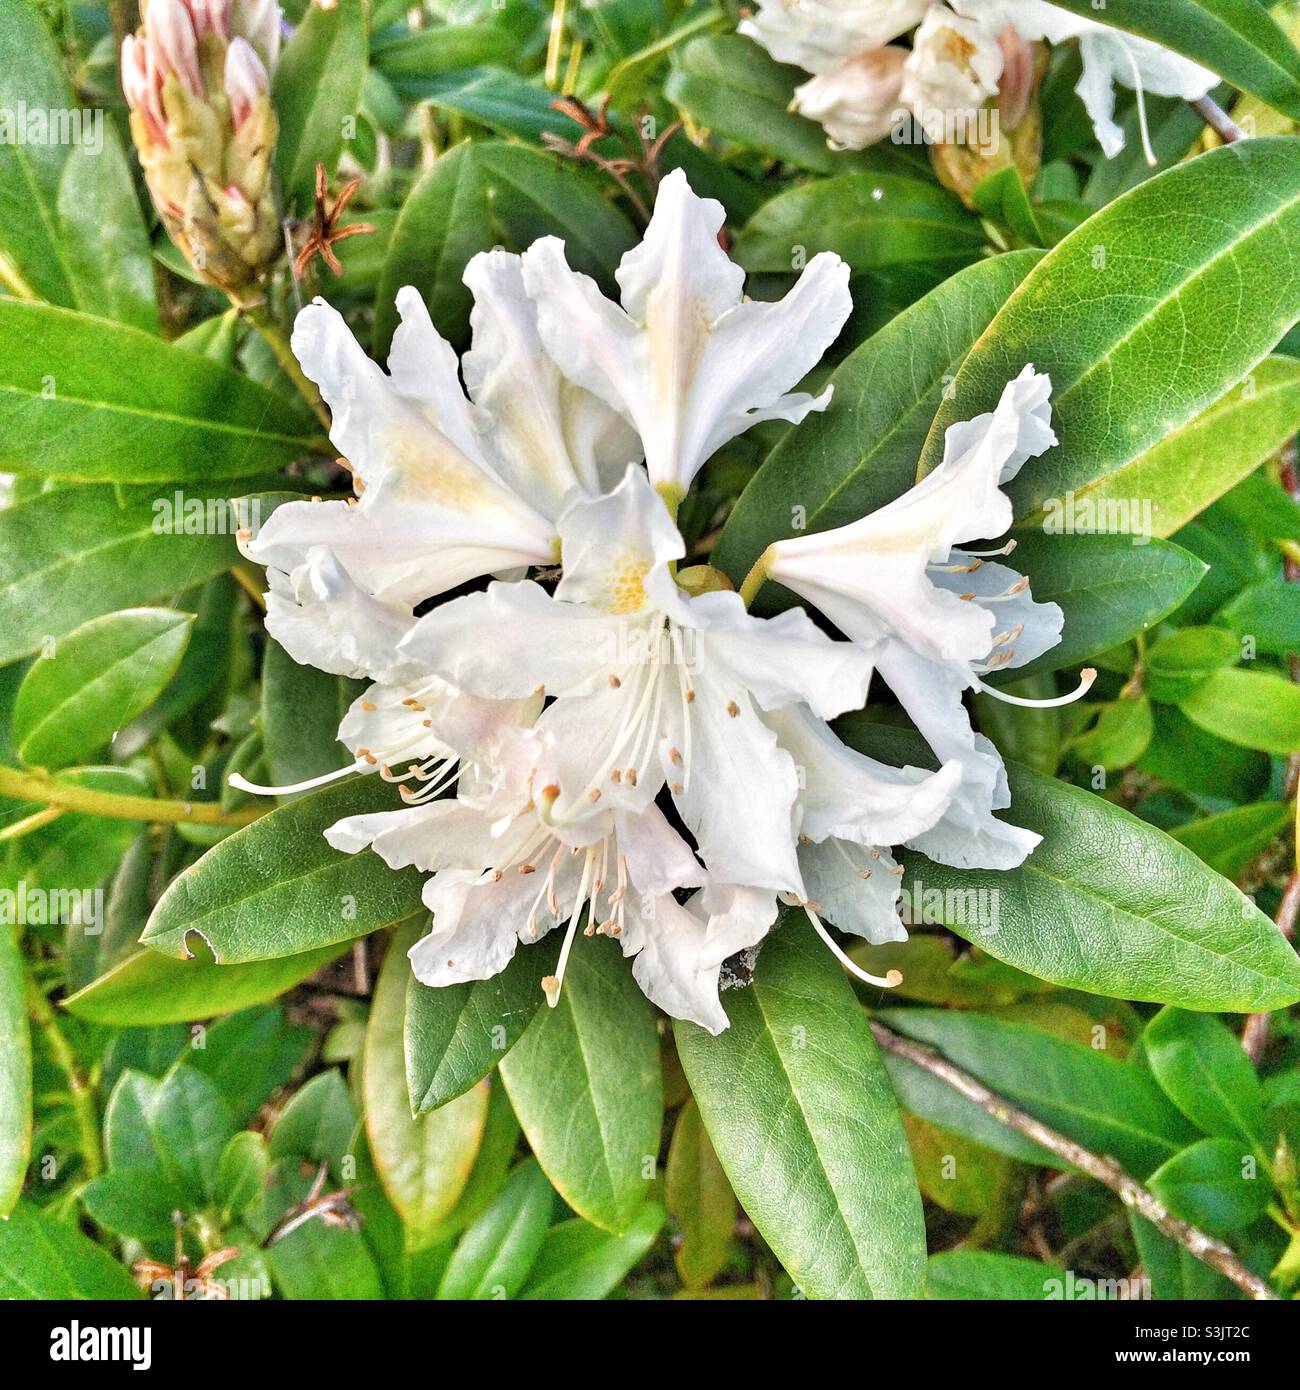 Rhododendron in bloom Stock Photo